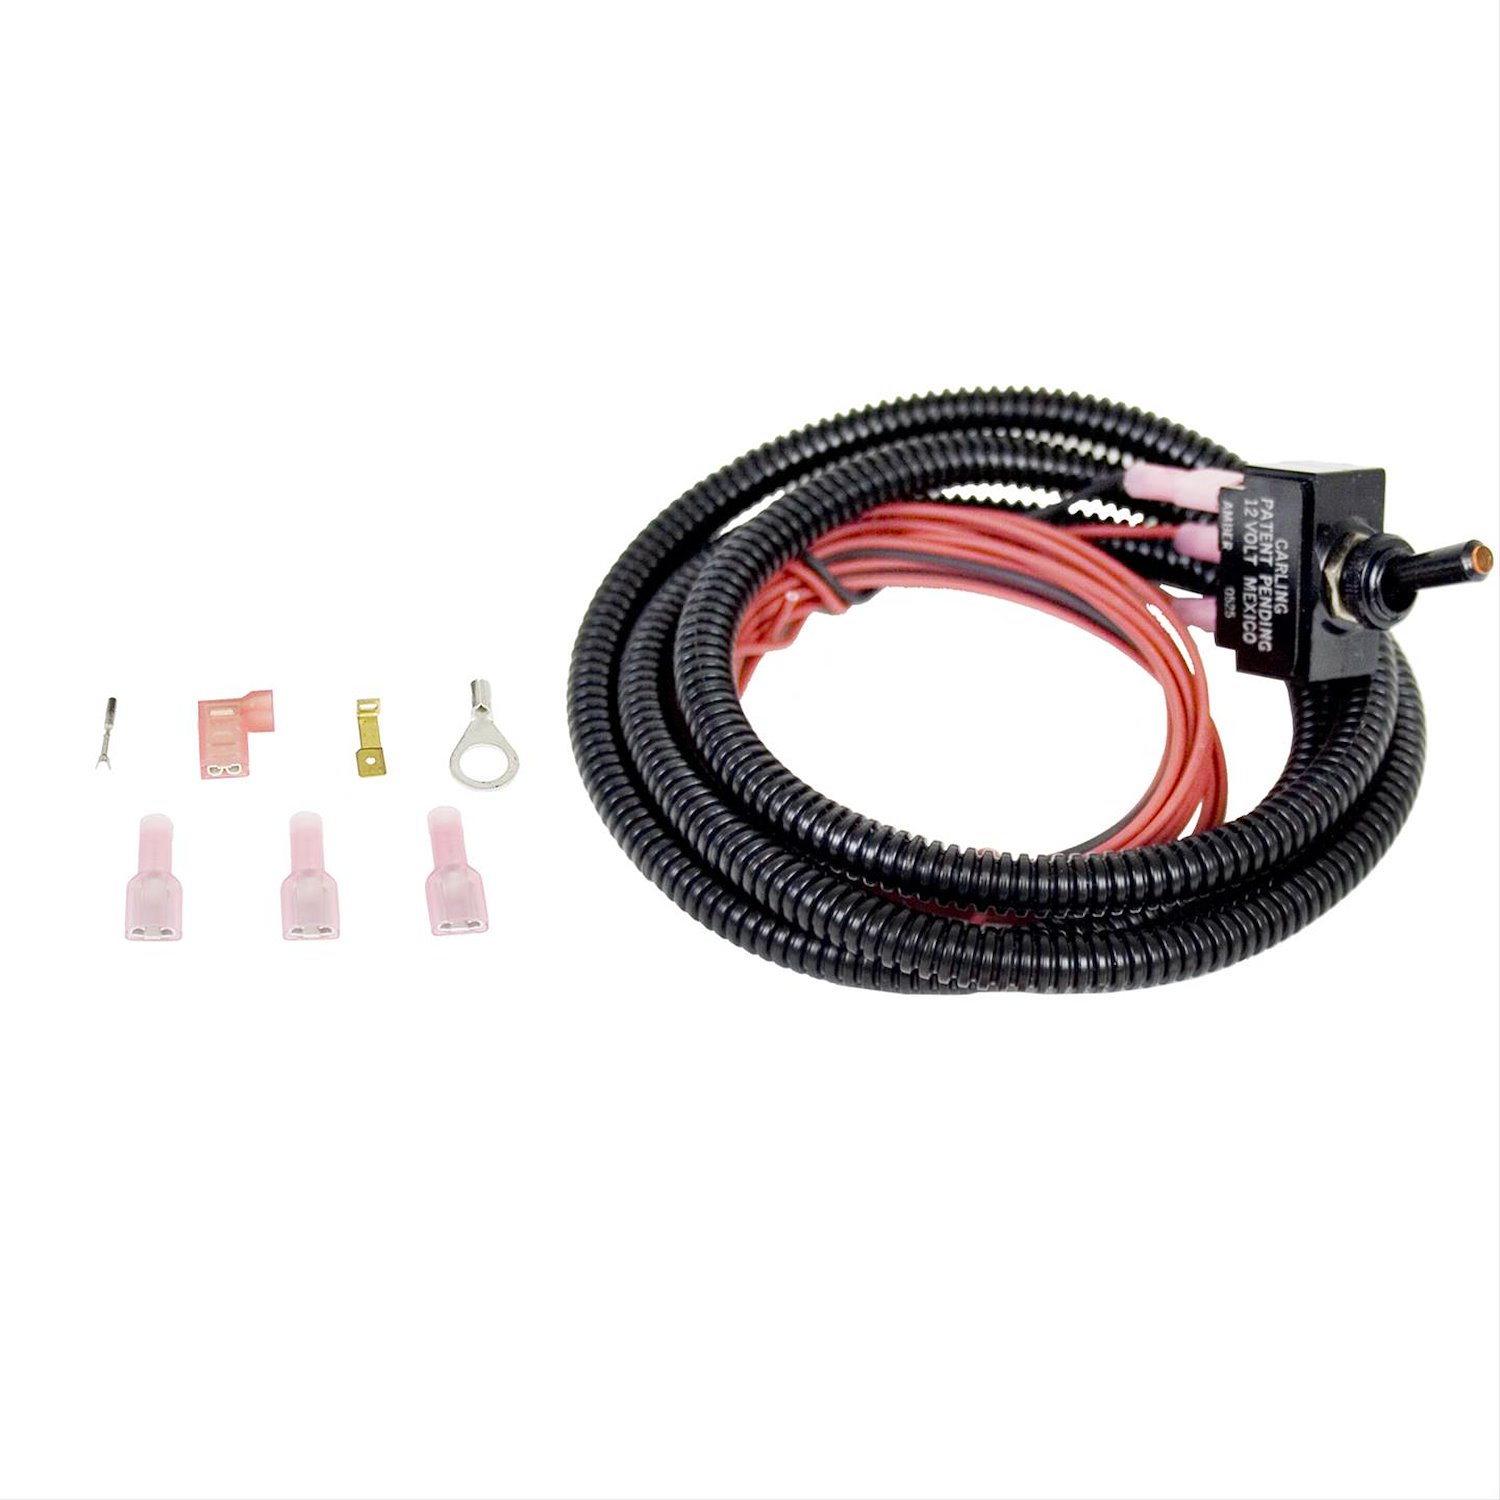 Governor Control Kit 2004-2006 Chevy Duramax Diesel